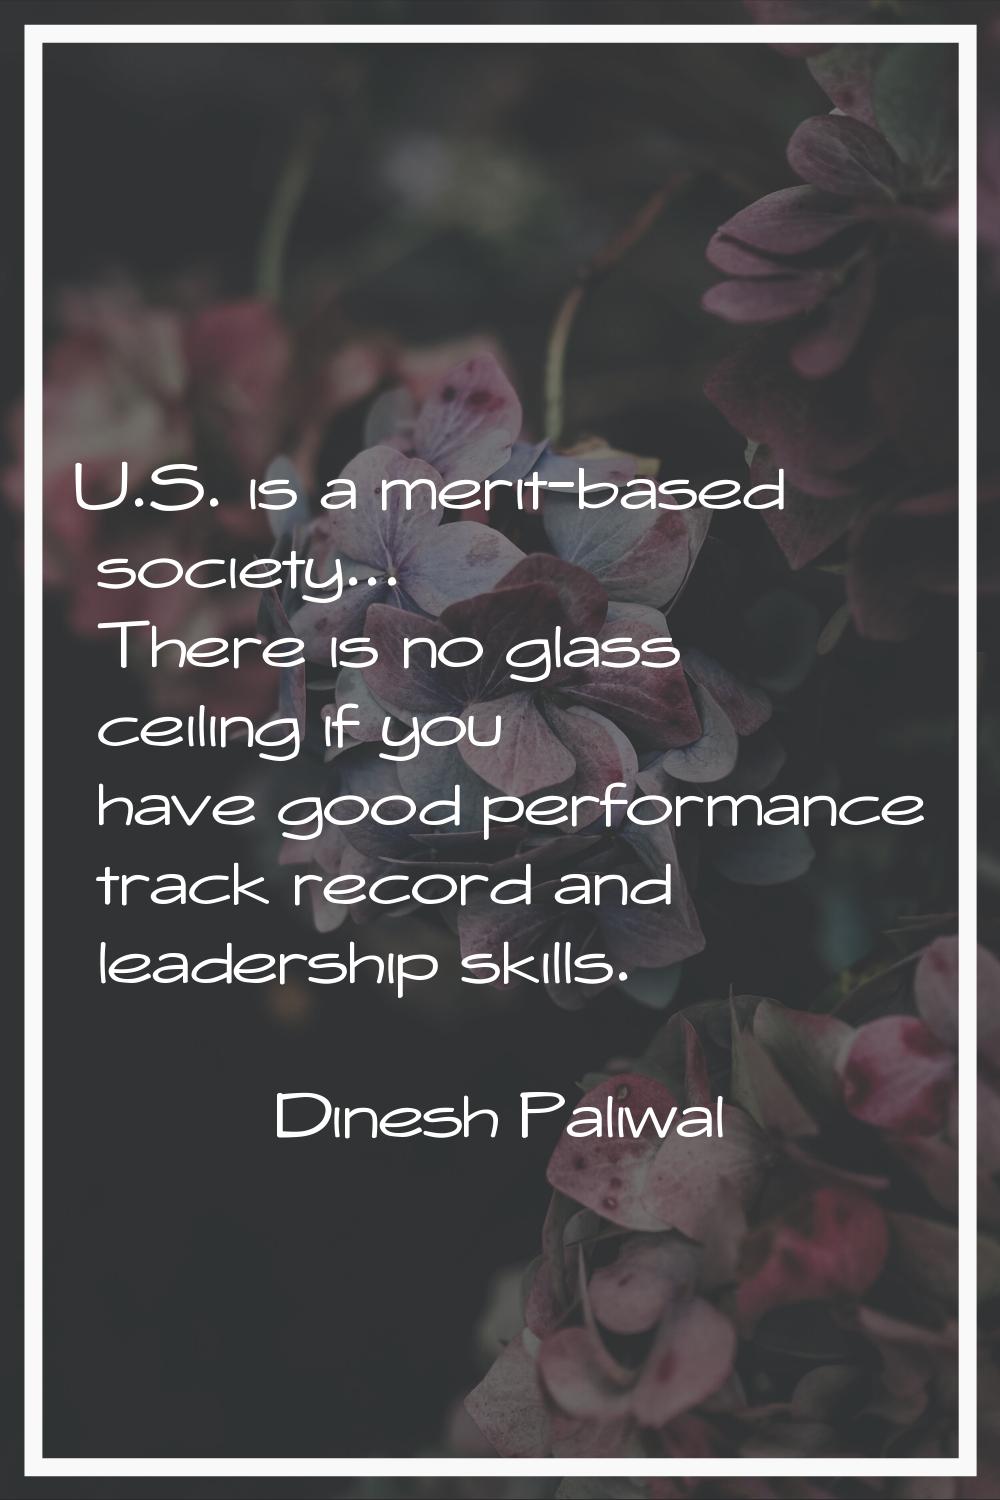 U.S. is a merit-based society... There is no glass ceiling if you have good performance track recor